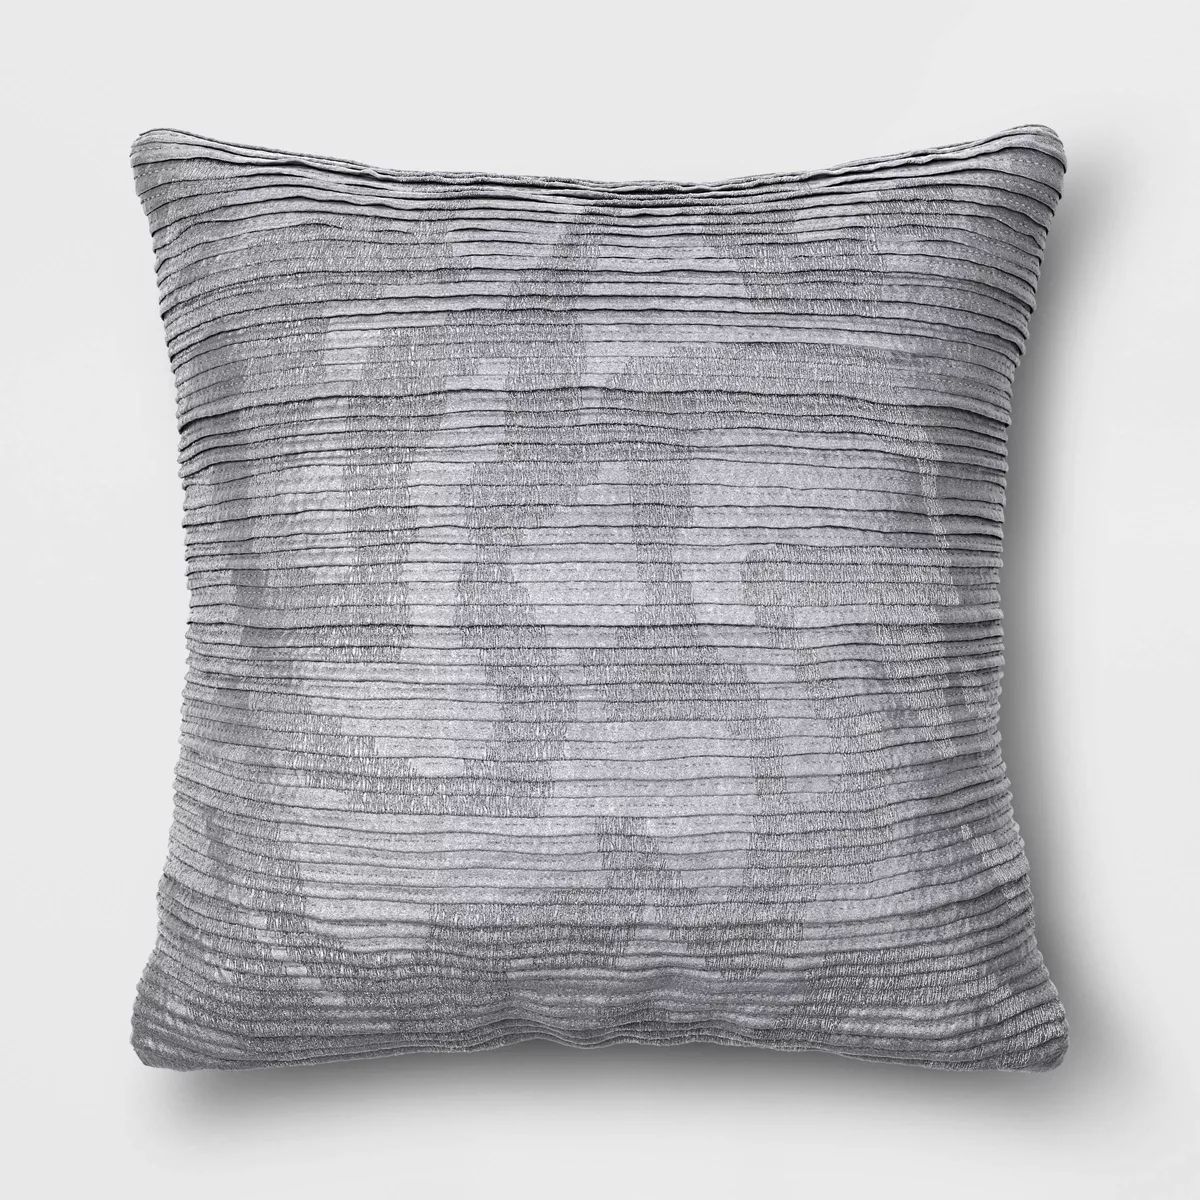 Geometric Patterned Pleated Satin with Metallic Embroidery Square Throw Pillow - Threshold™ | Target